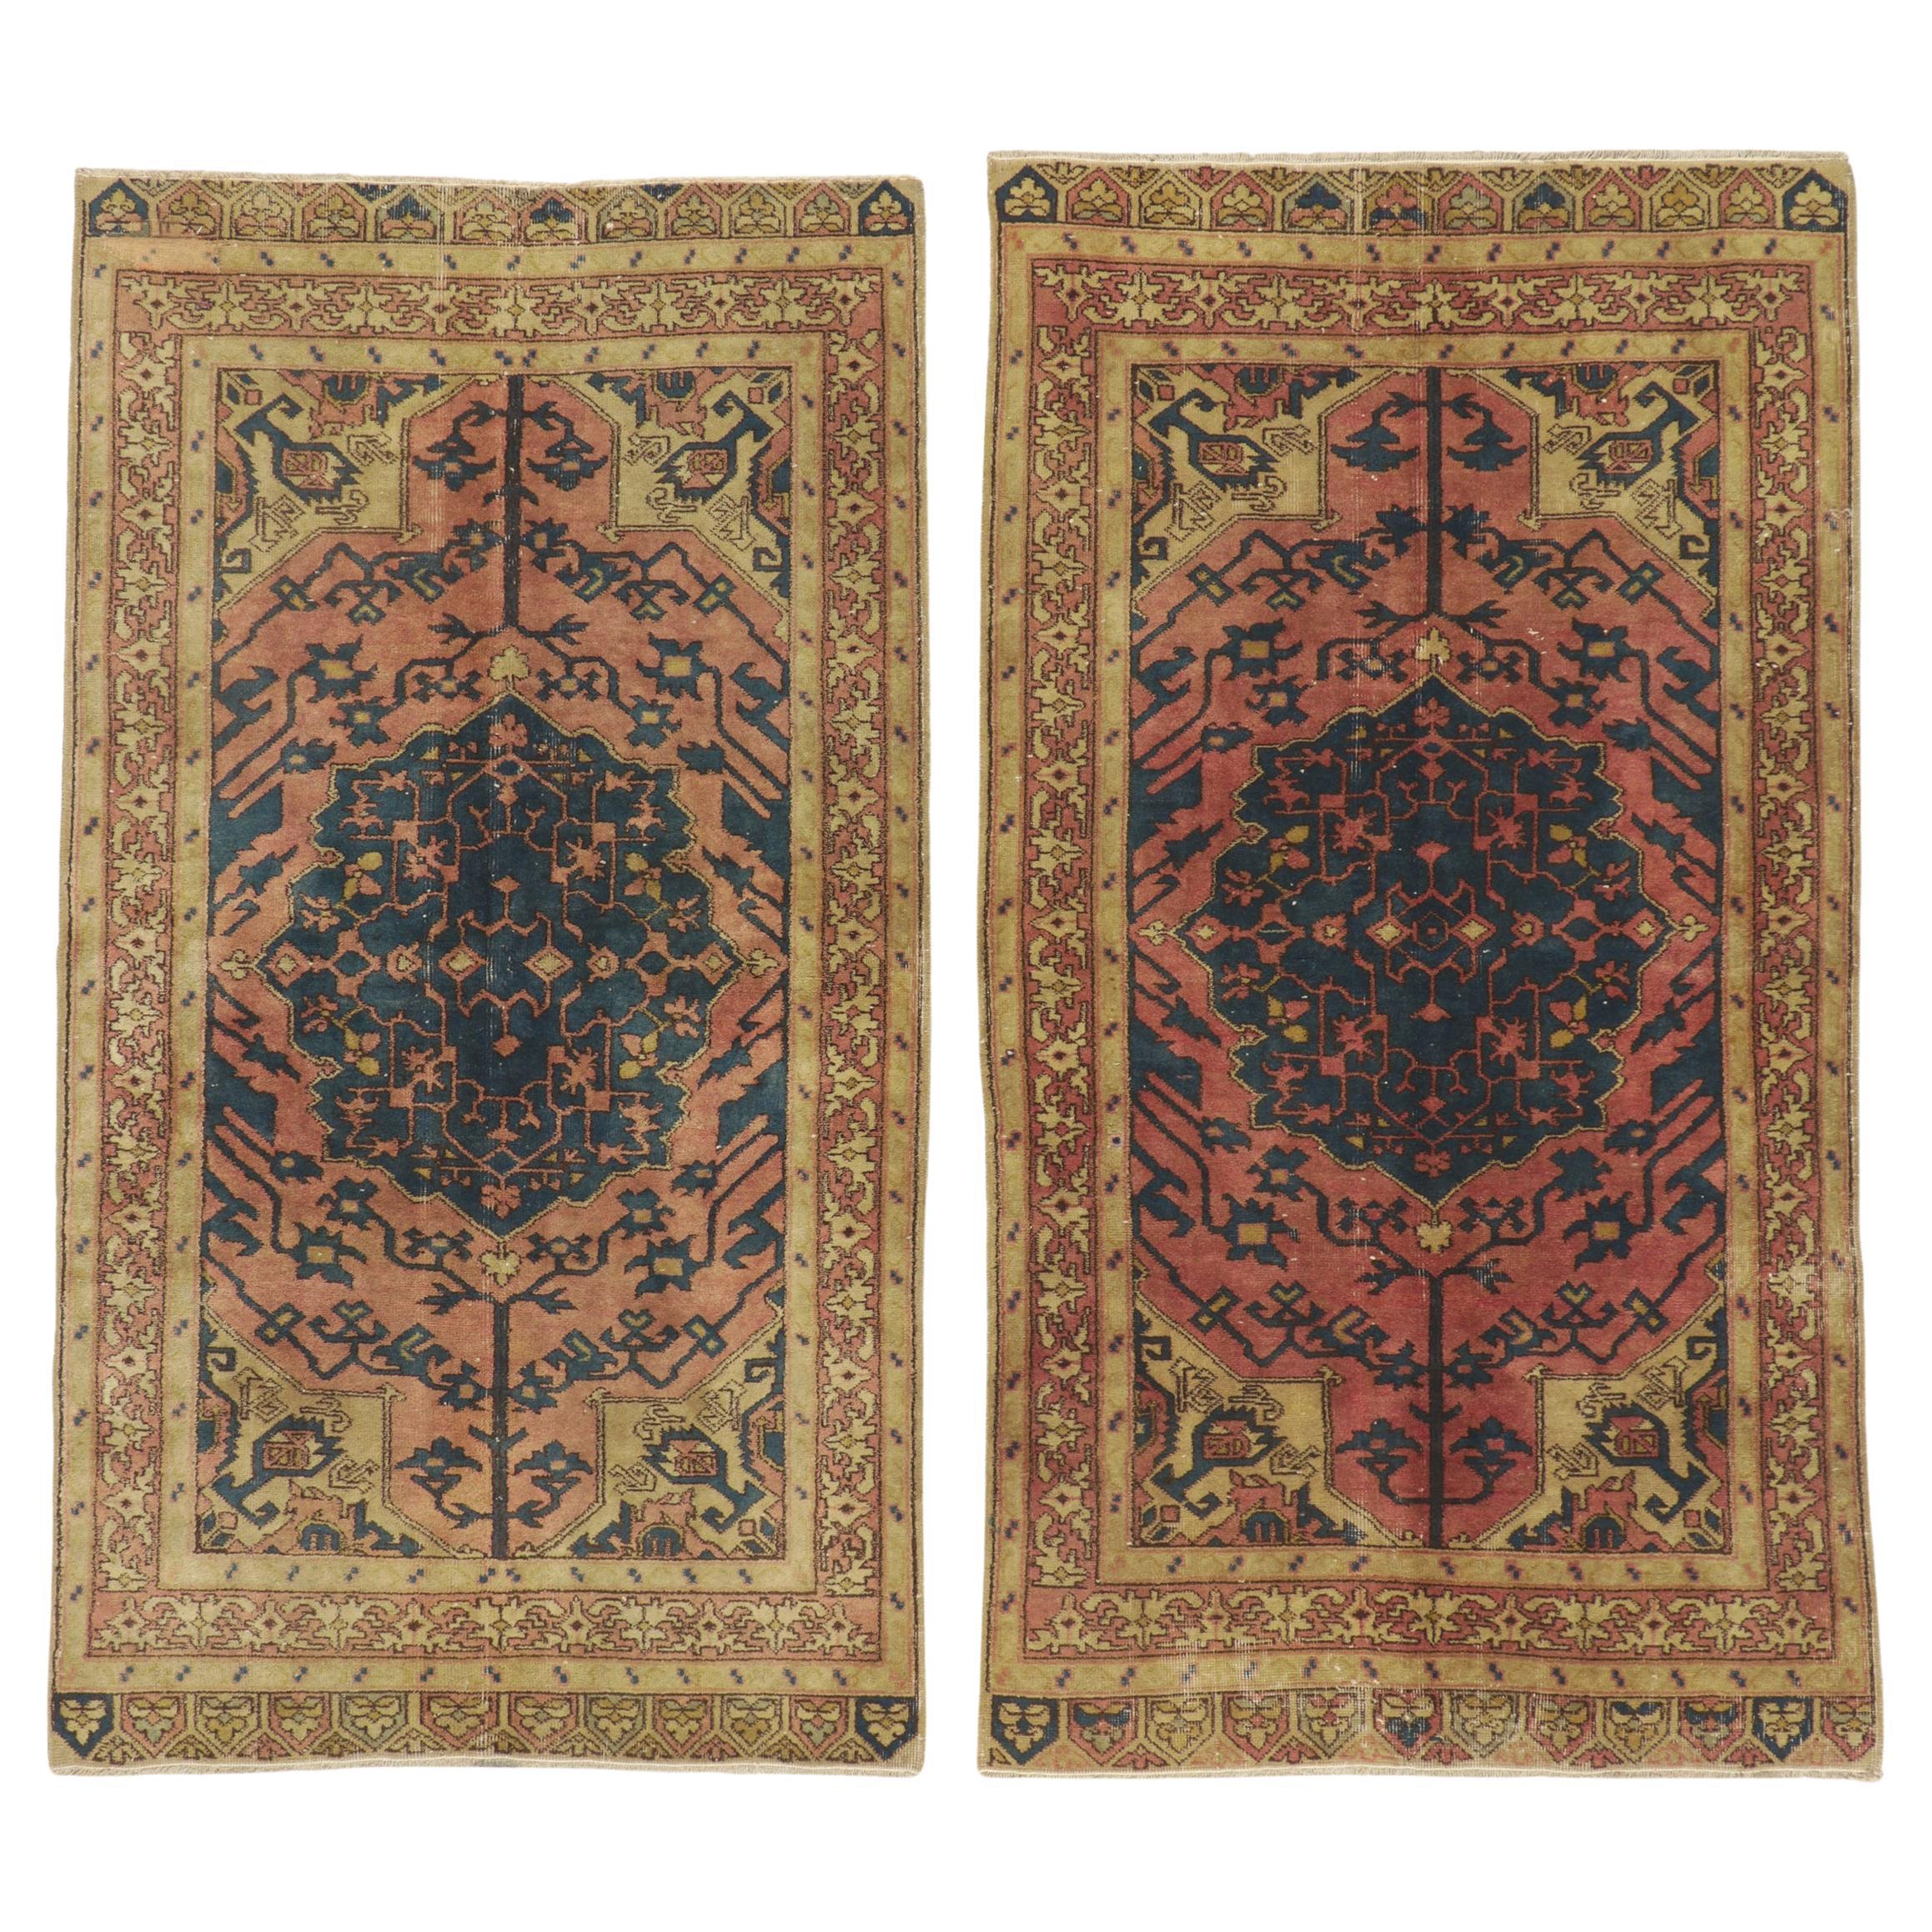 Pair of Matching Vintage Turkish Sivas Rugs with Rustic Earth-Tone Colors